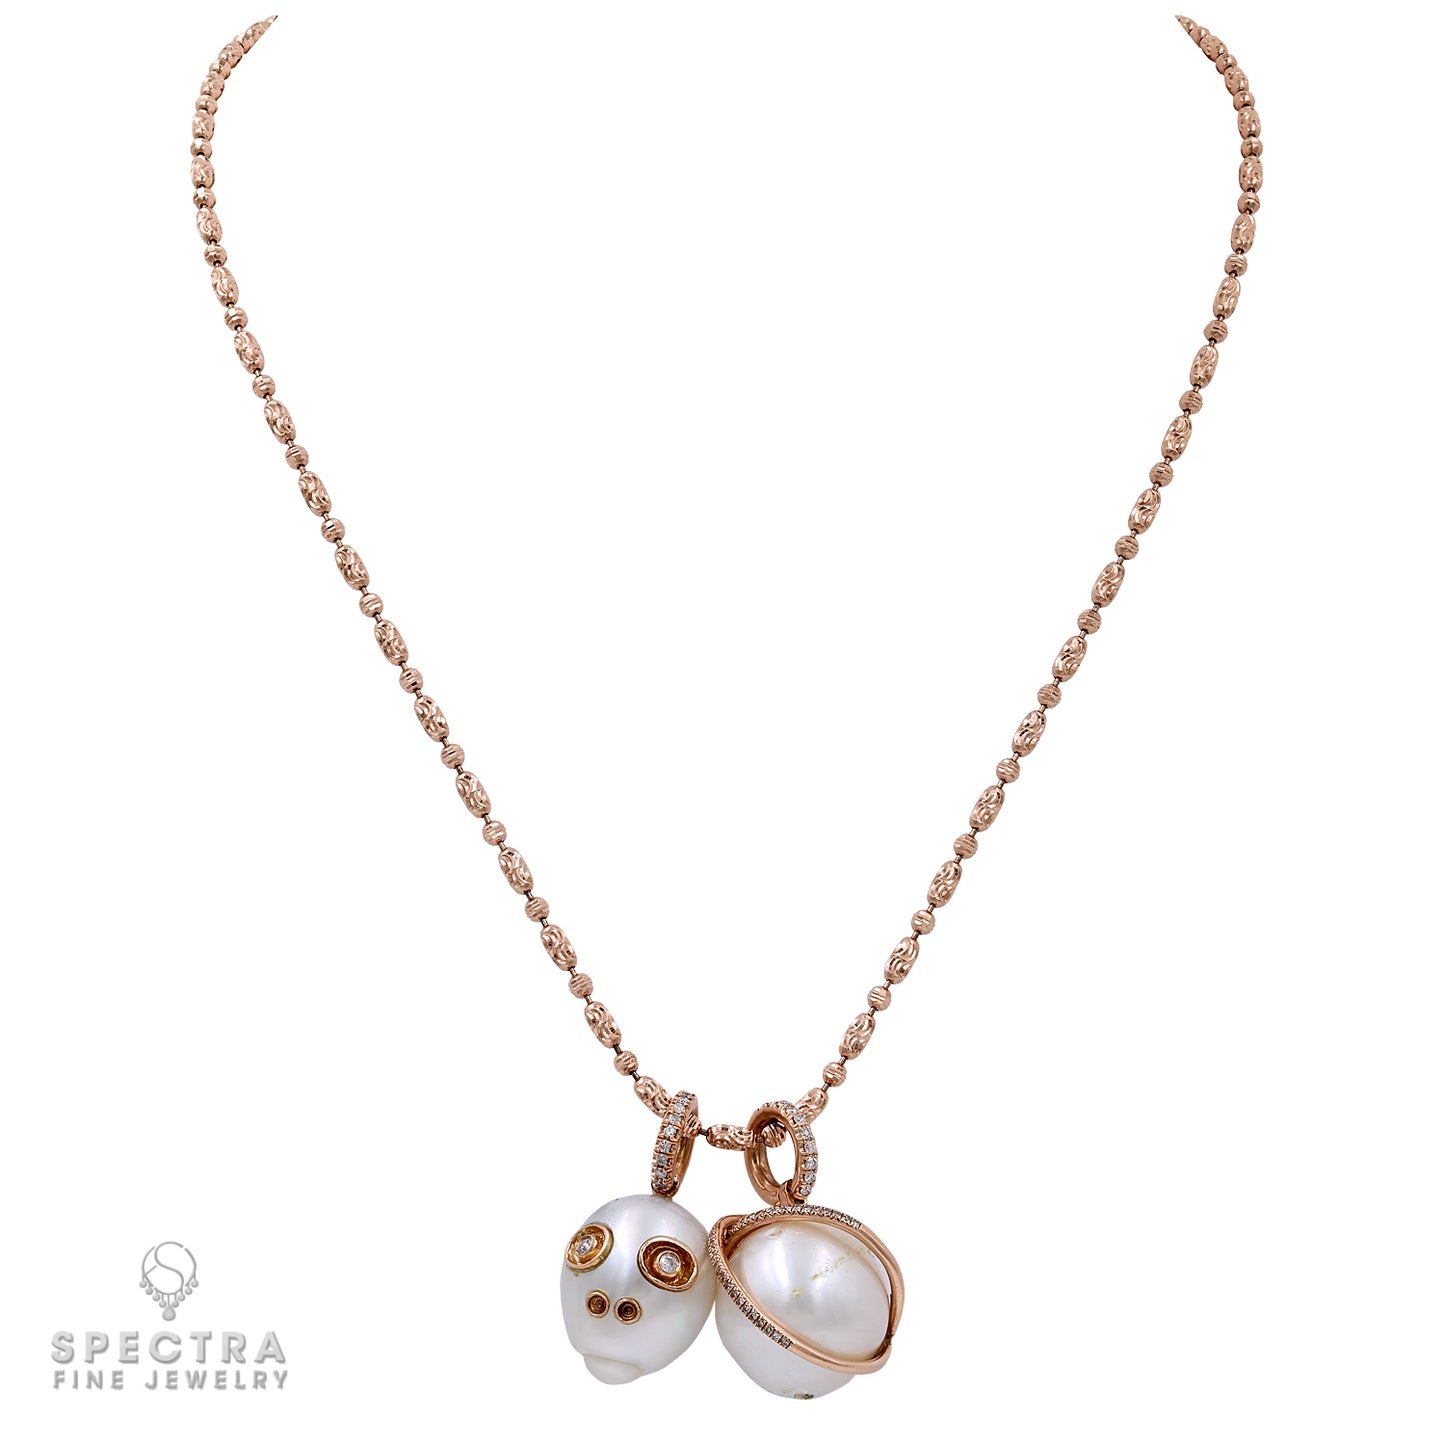 Pearls and Diamond Pendant Chain Necklace